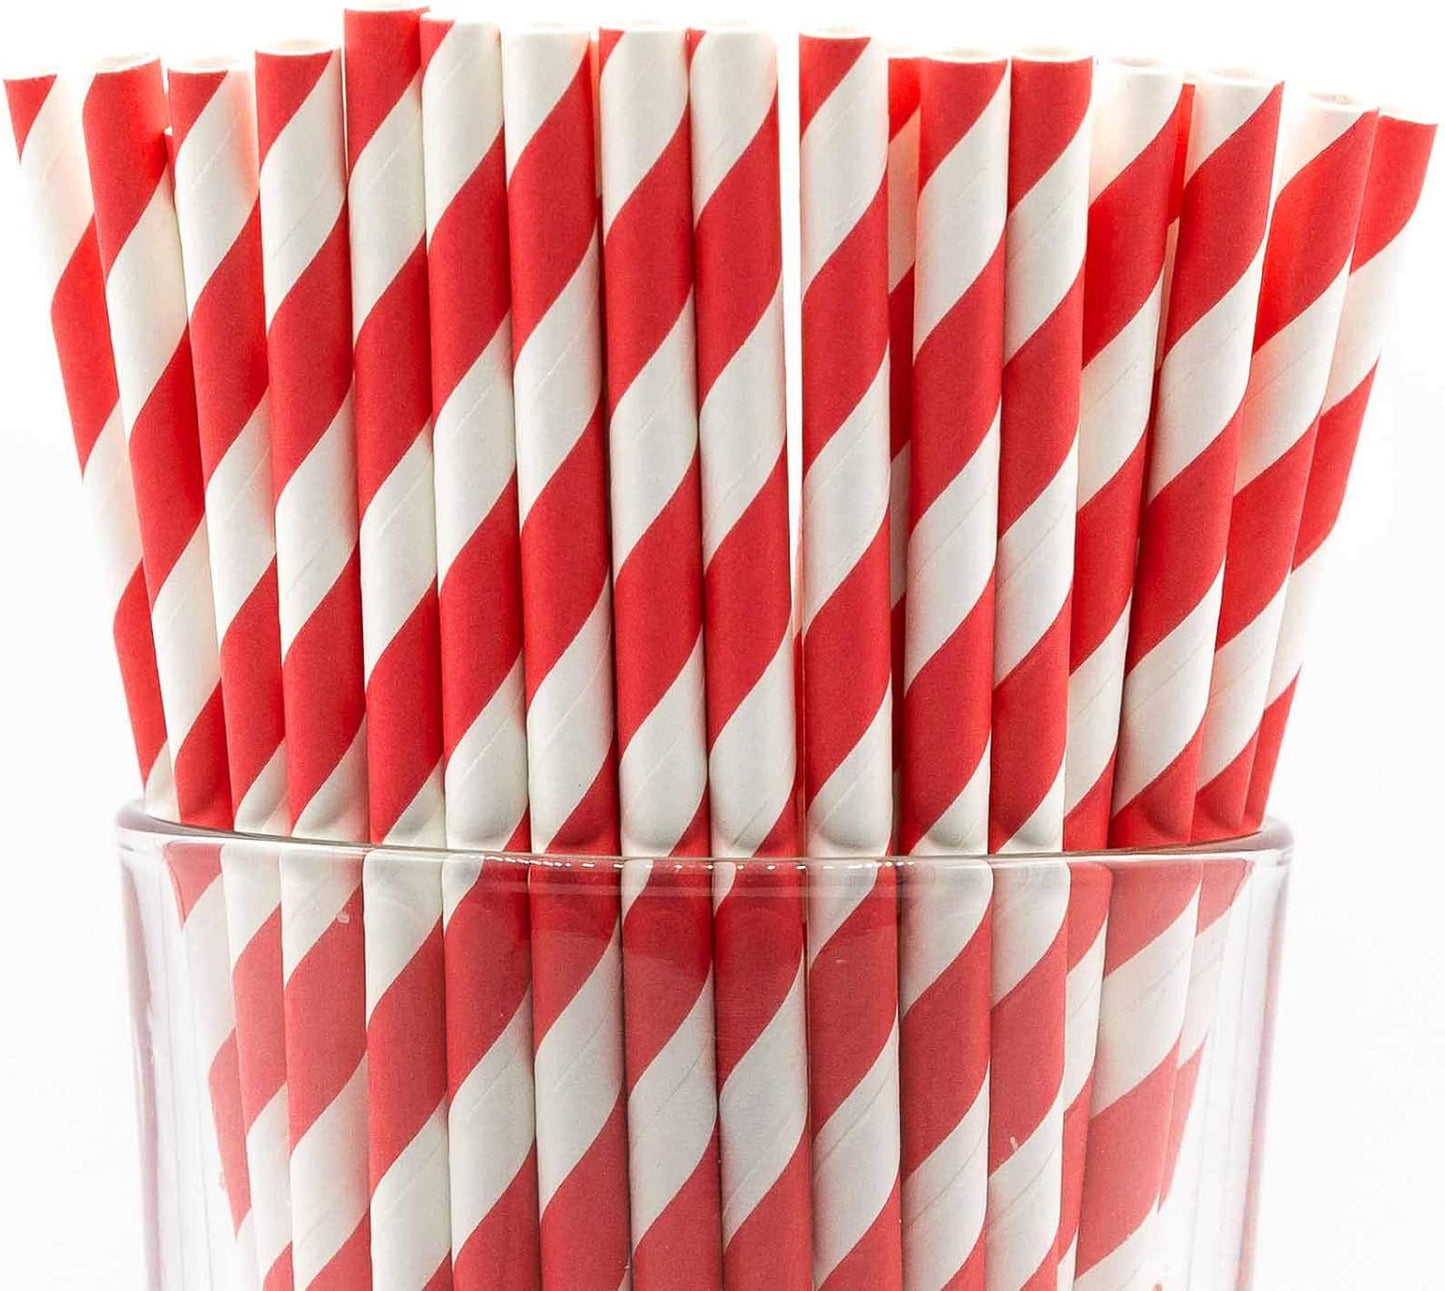 (Pack of 150) Red Swirls Biodegradable 4-Ply Paper Drinking Straws (Compostable, Non-Toxic, BPA-Free)